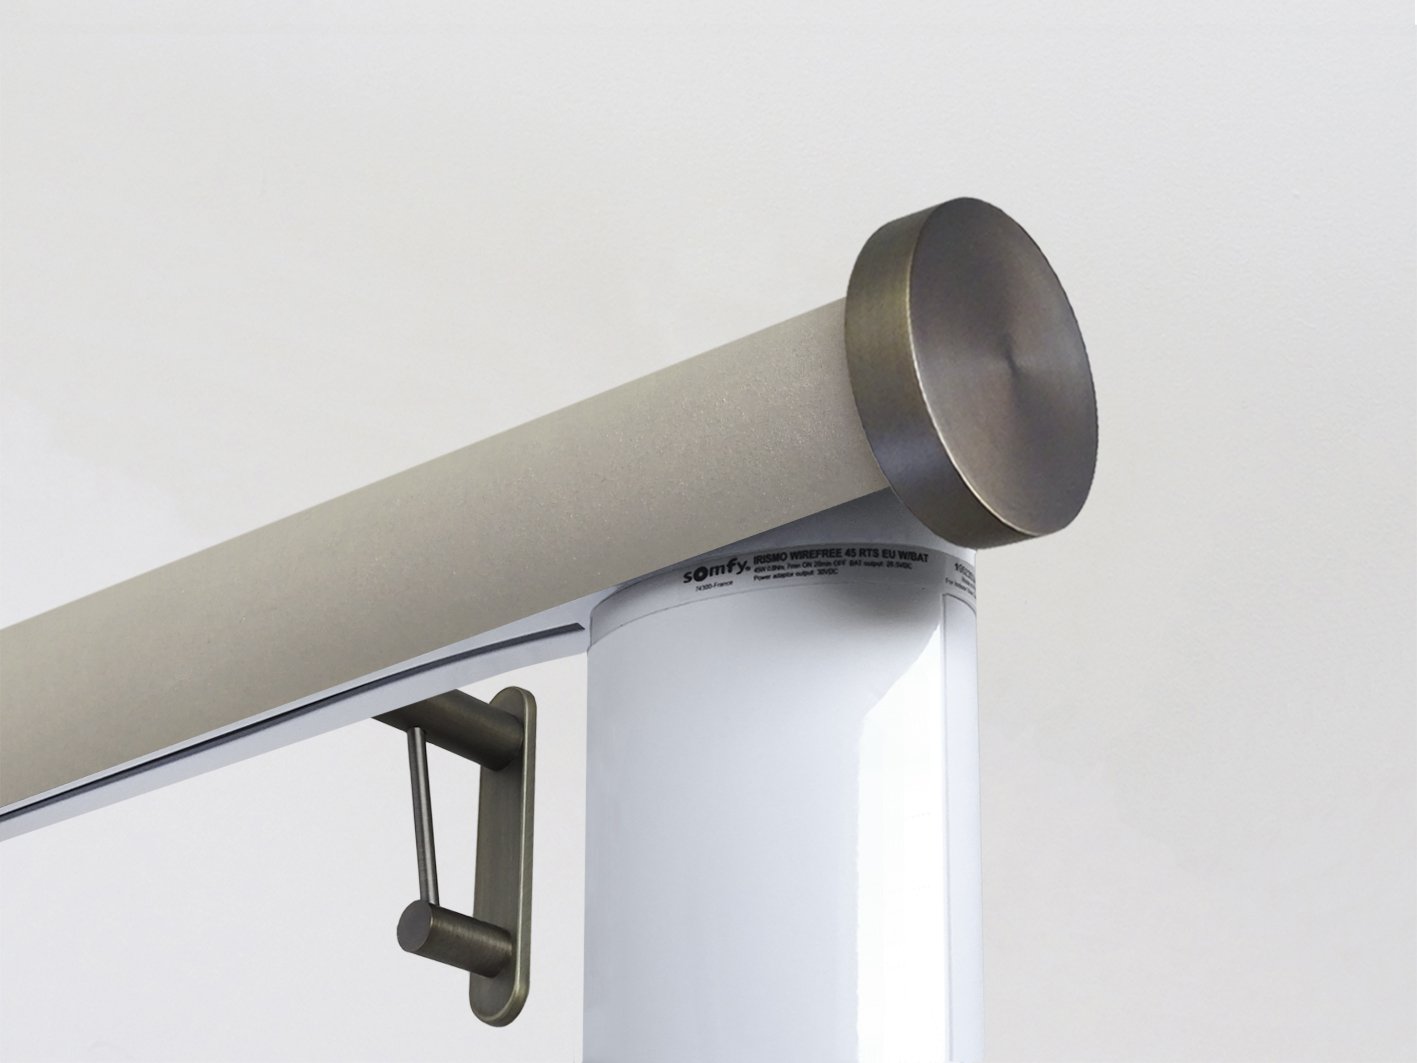 Motorised electric curtain pole in fawn beige suede, wireless & battery powered using the Somfy Glydea track | Walcot House UK curtain pole specialists